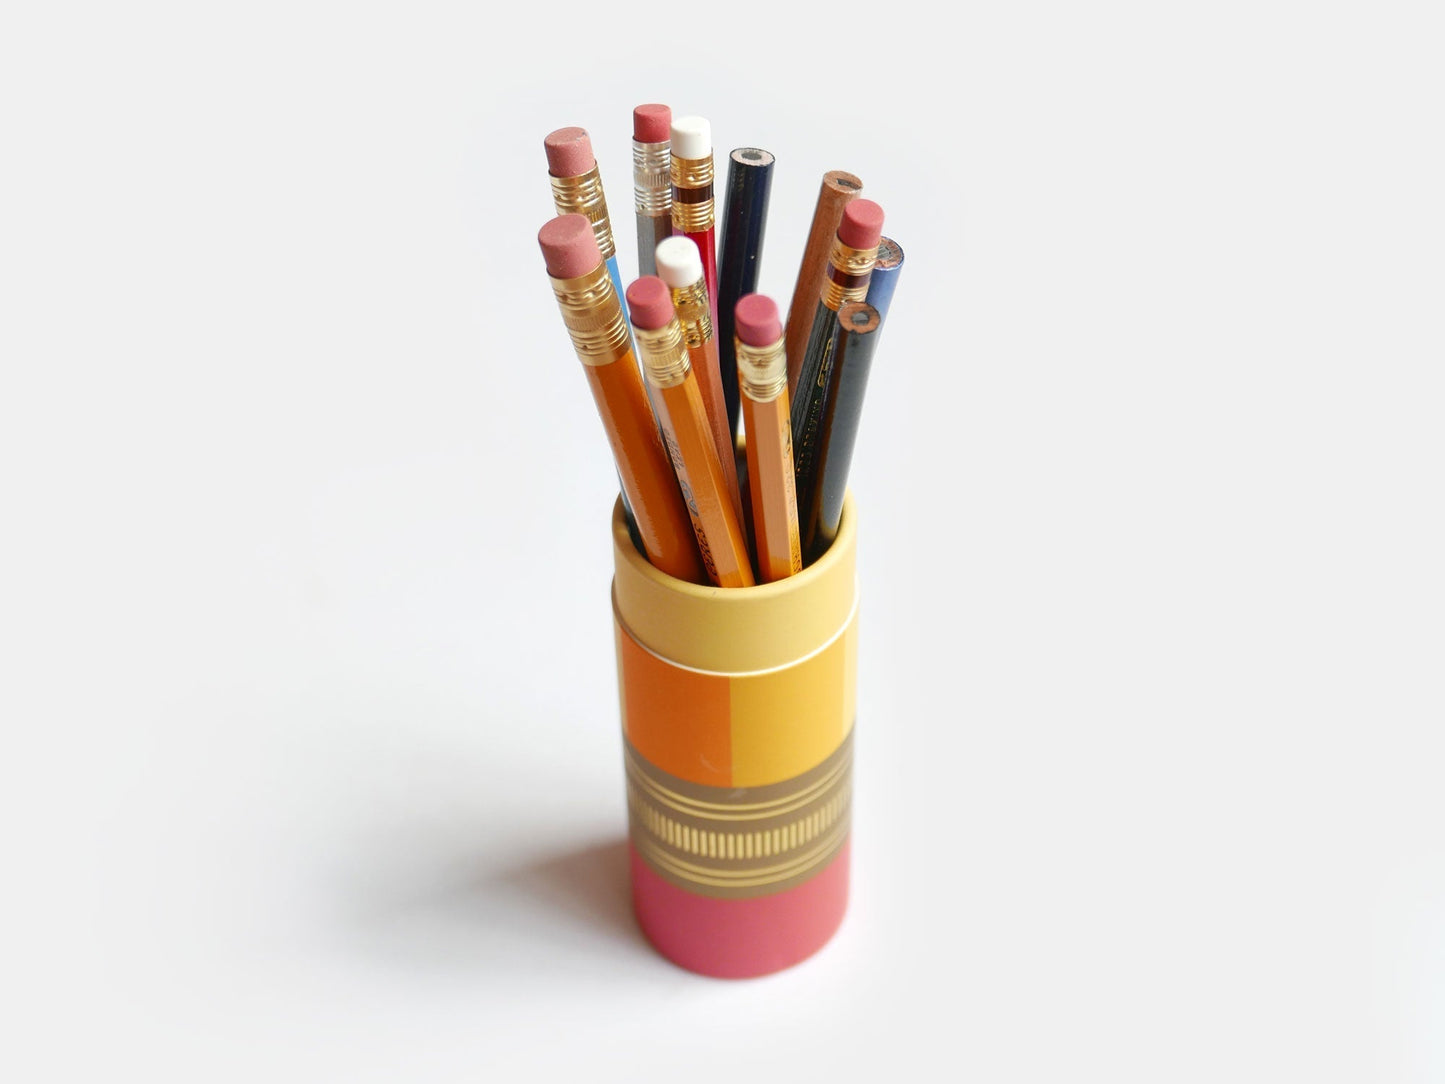 Heritage Pencil Collection